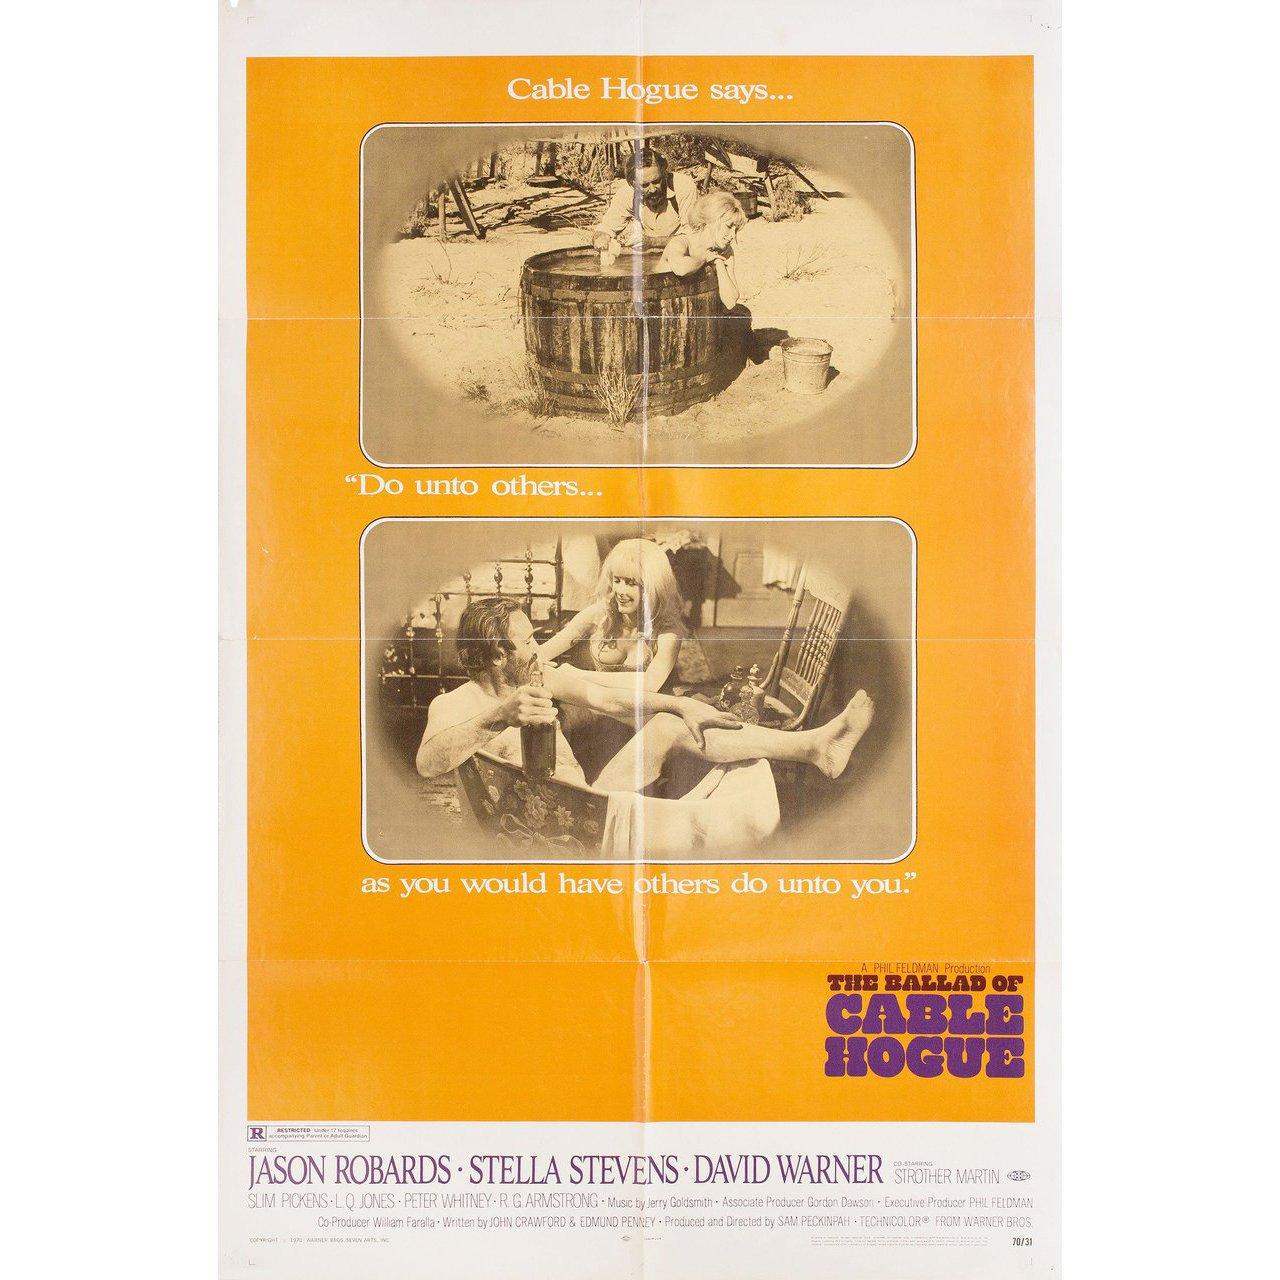 Original 1970 U.S. one sheet poster for. Very good-fine condition, folded. Many original posters were issued folded or were subsequently folded. Please note: the size is stated in inches and the actual size can vary by an inch or more.